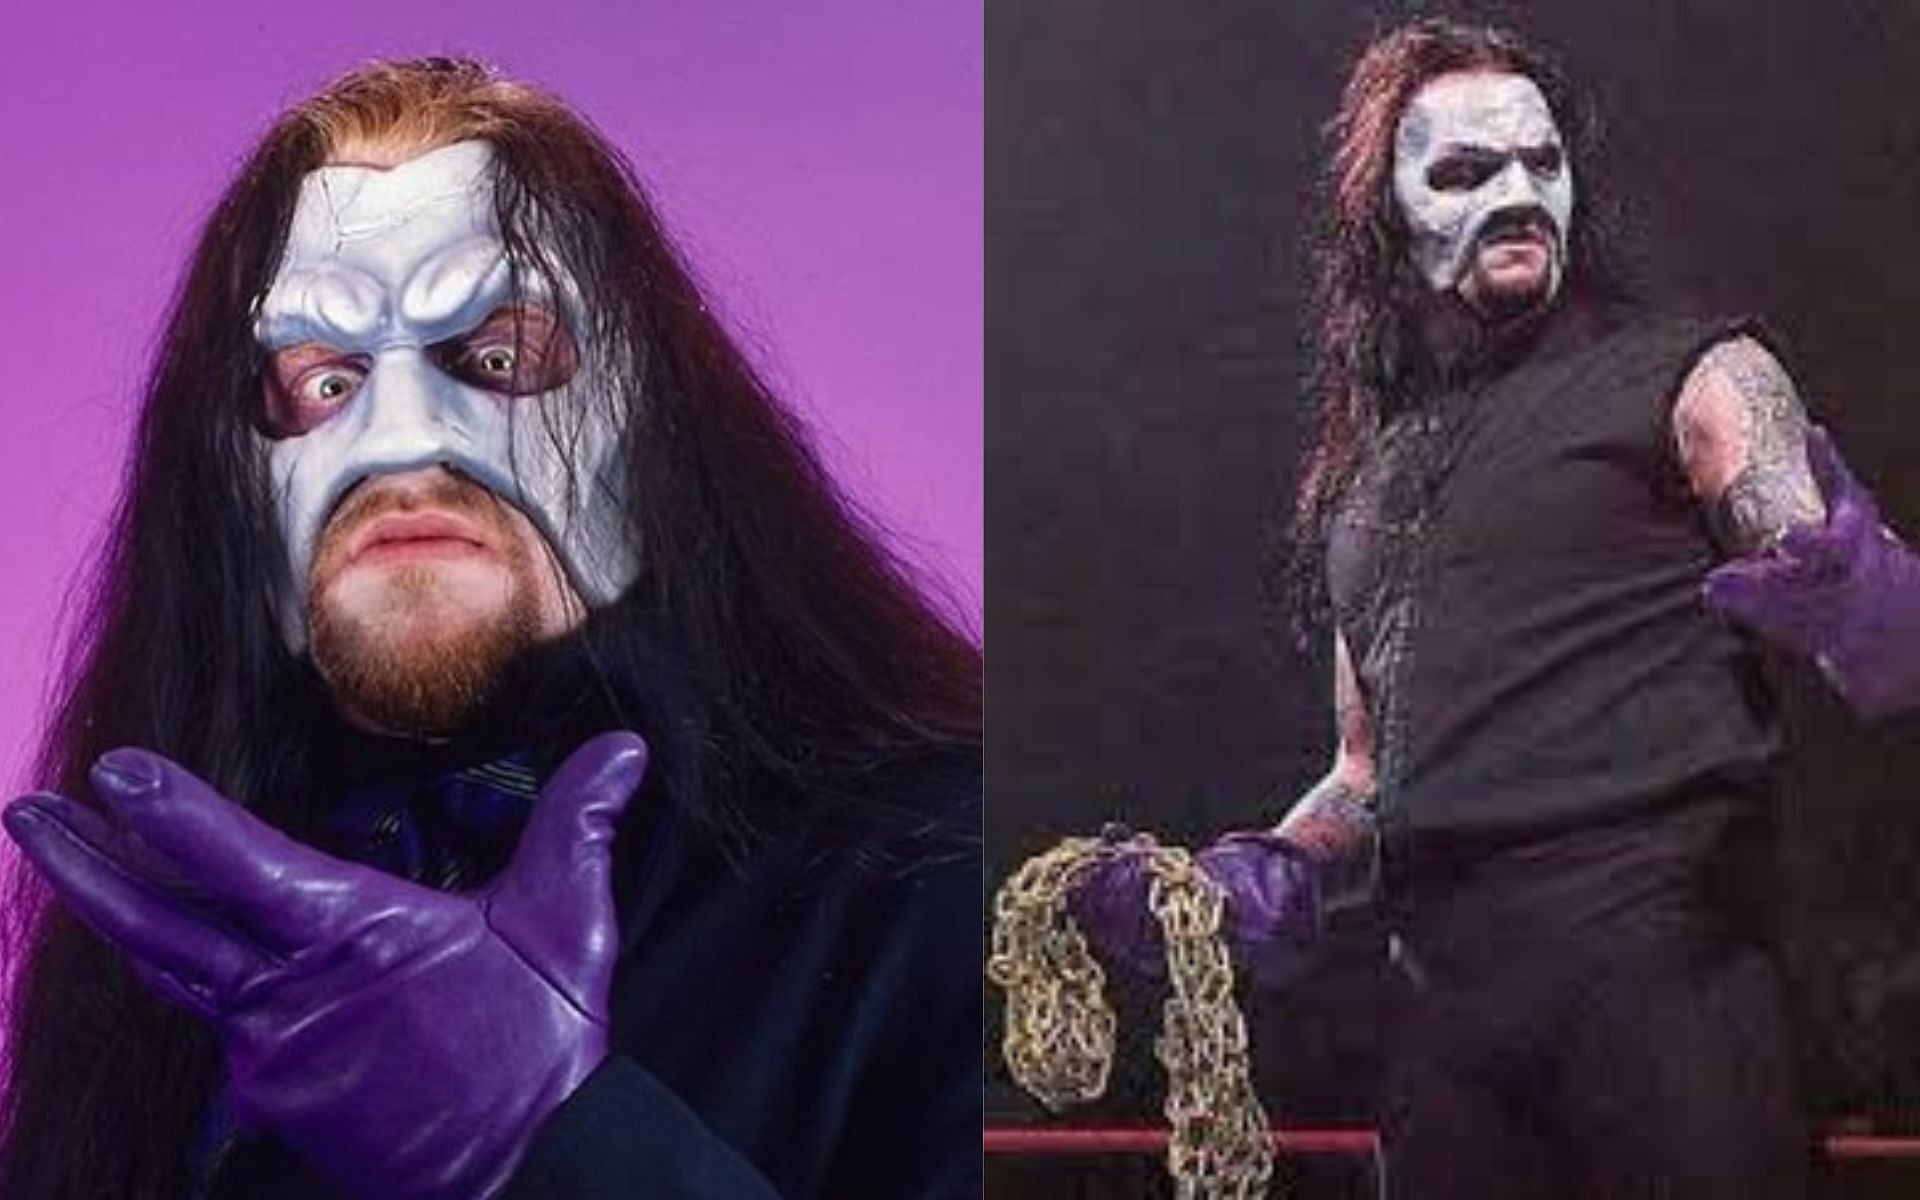 Undertaker wore a mask during 1995-1996